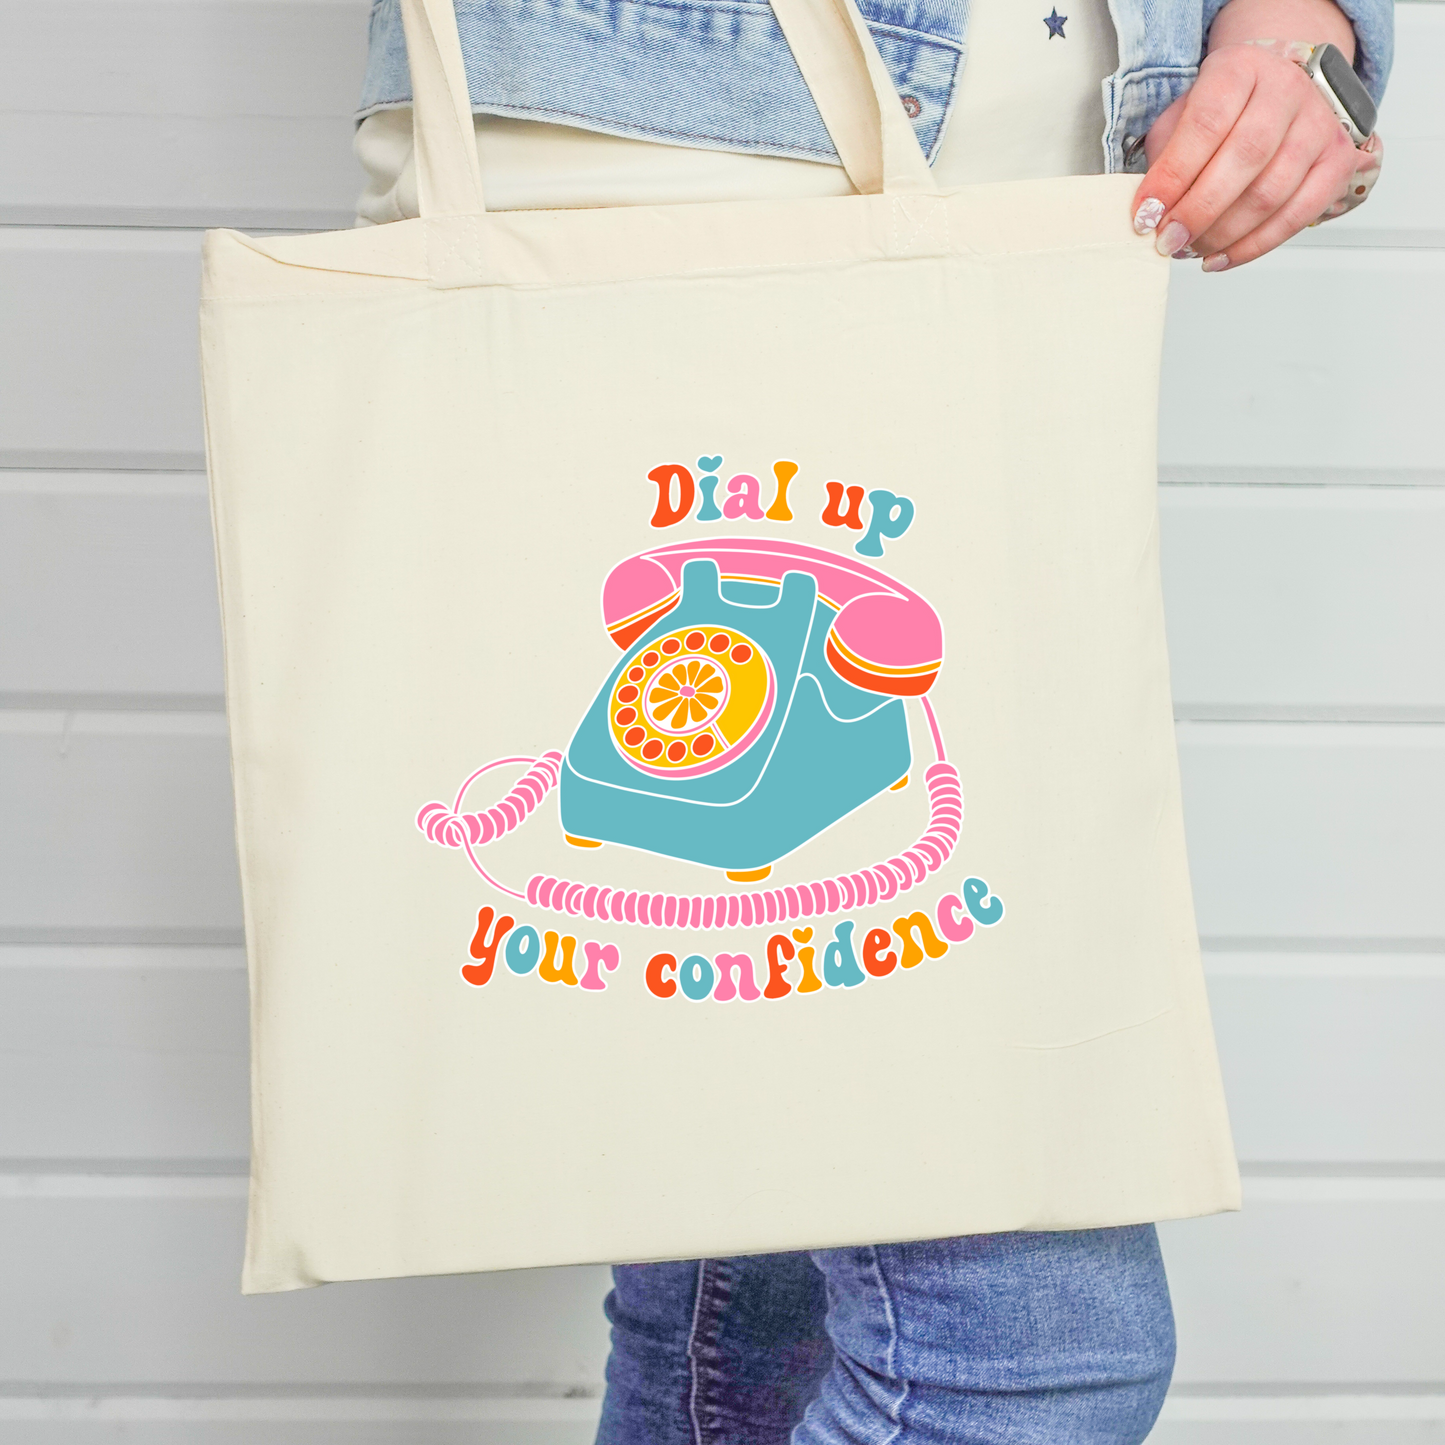 Dial Up Your Confidence Tote Bag